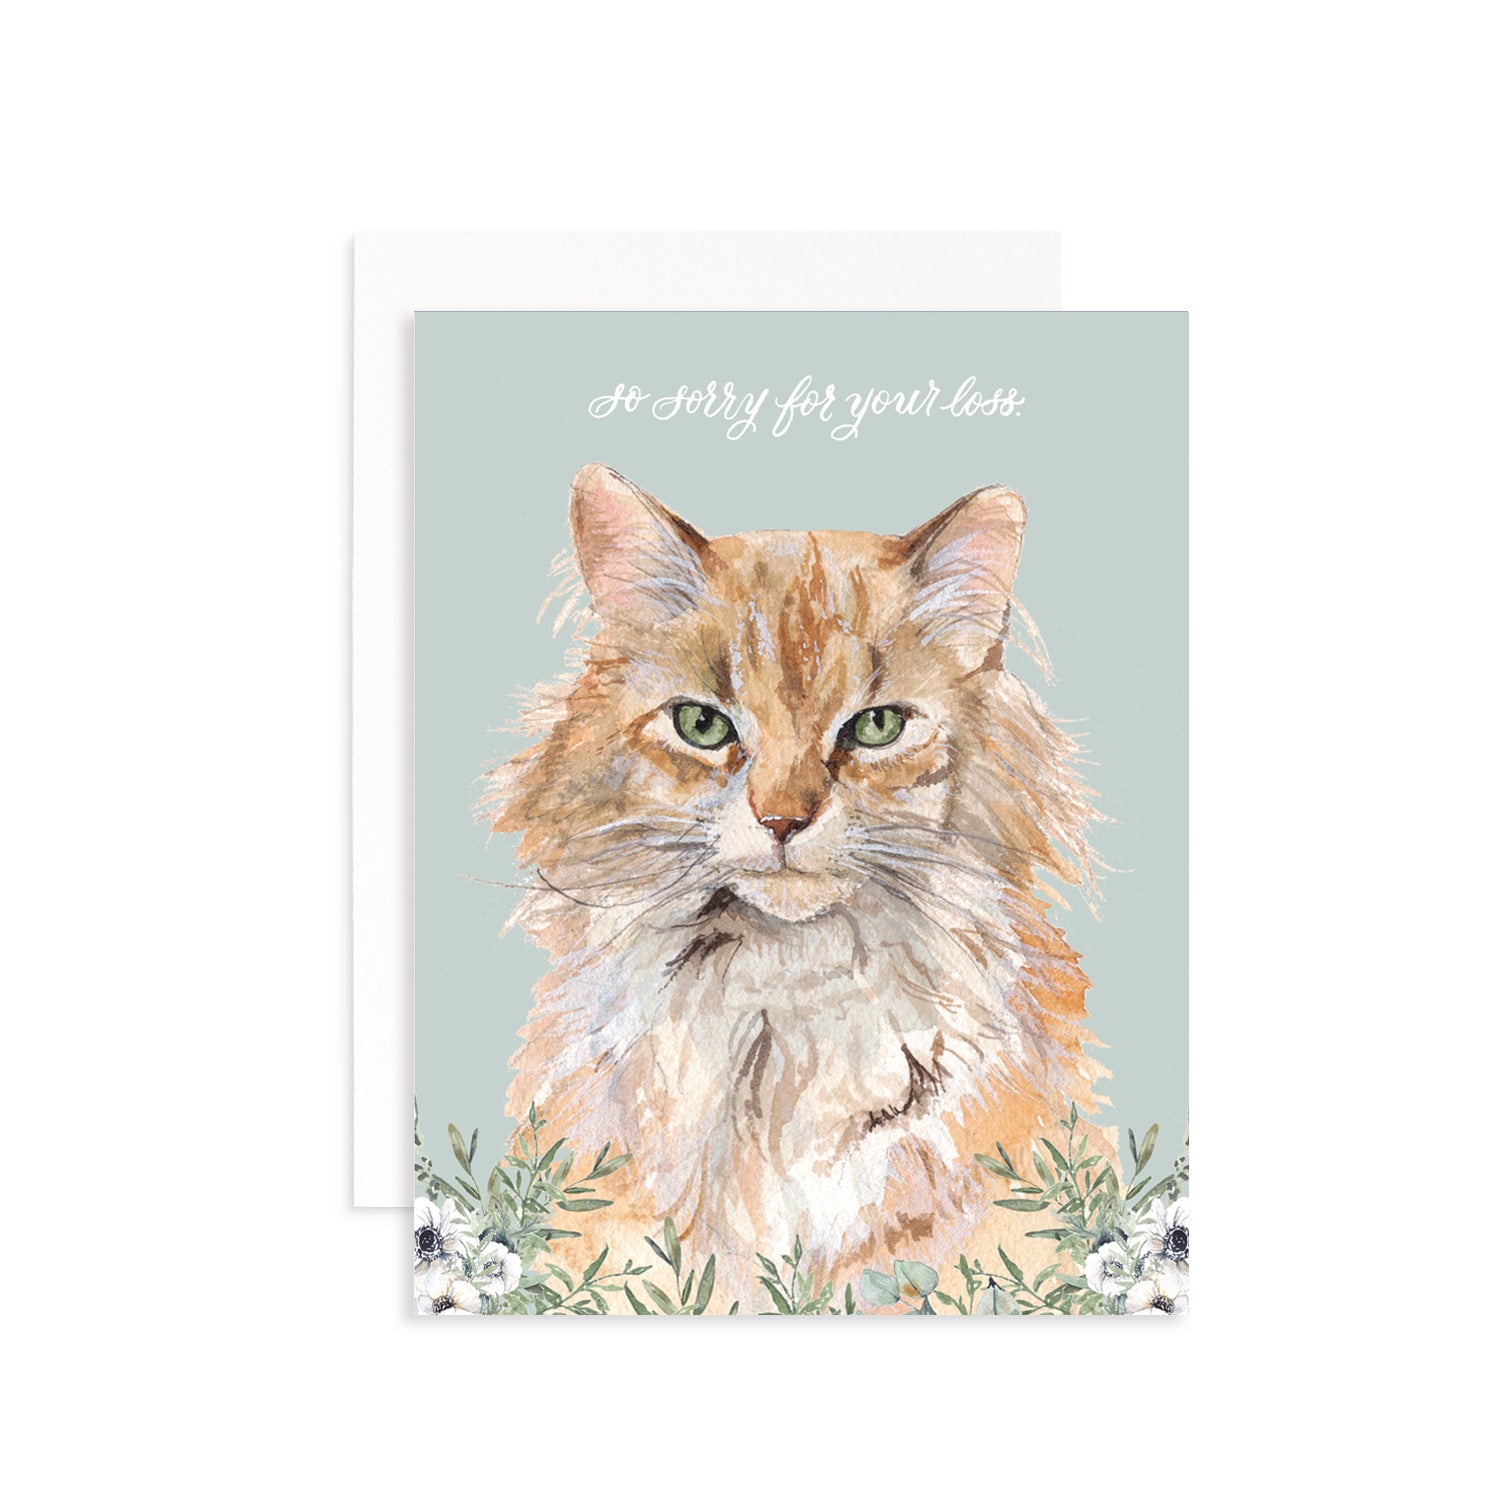 So Sorry for Your Loss (Cat) Greeting Card